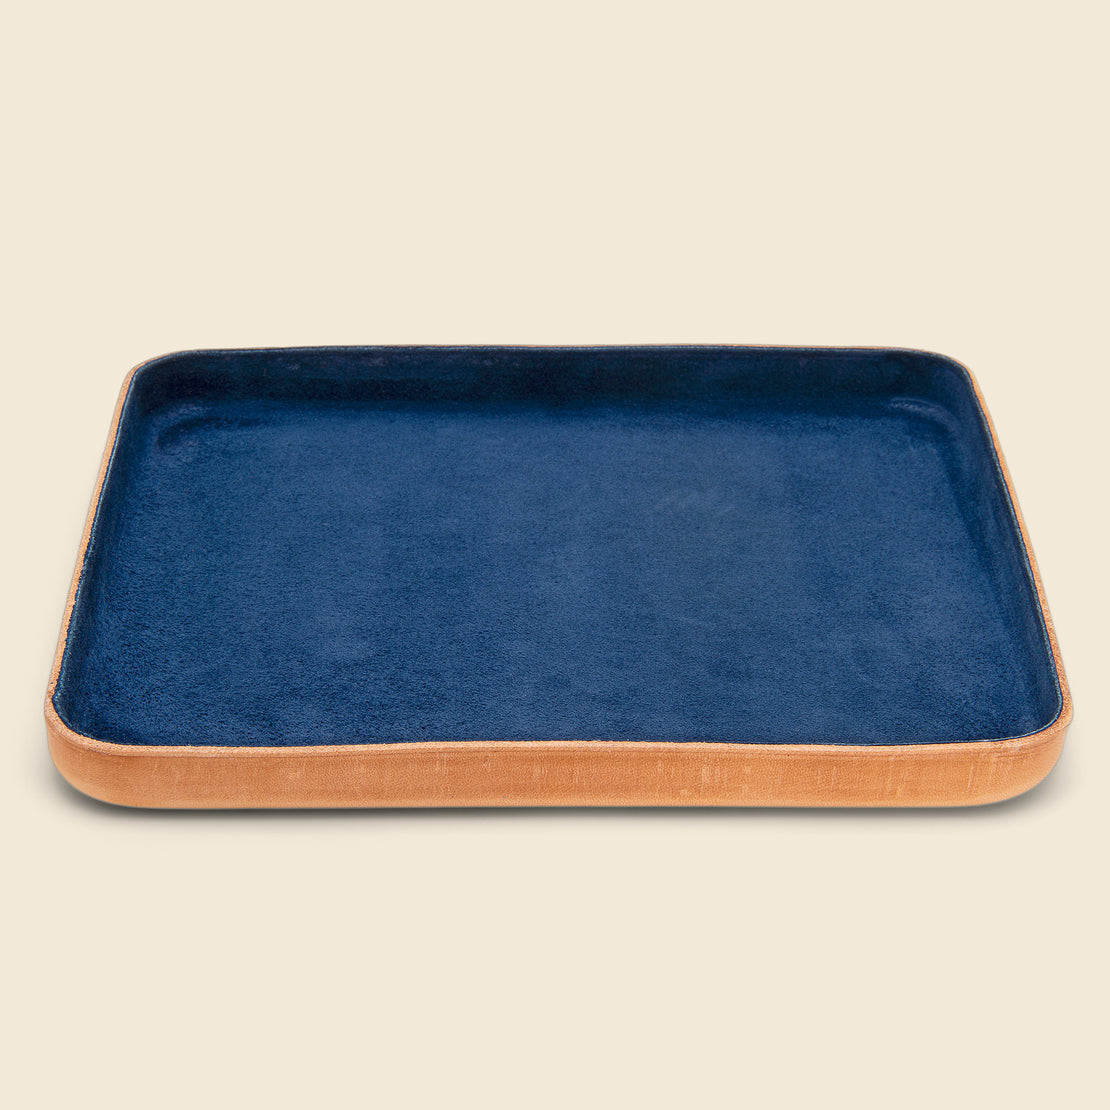 Home Large Suede Leather Tray - Navy